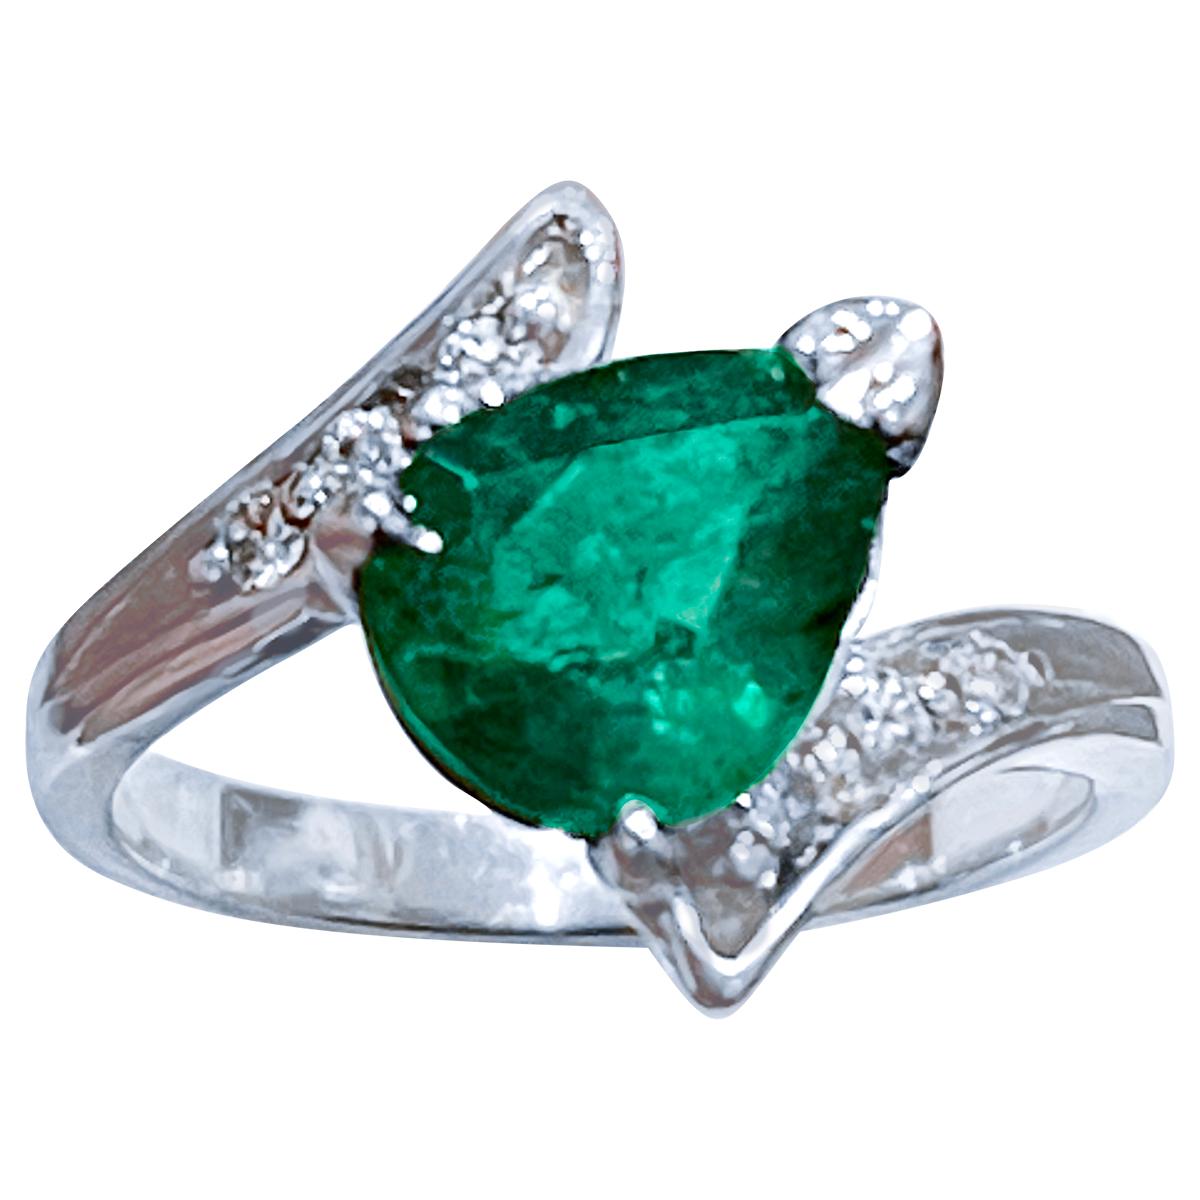 
Approximately 1.5 Carat Pear Cut  Emerald & Diamond Ring 14 Karat  White Gold Size 5
Pear shape  Emerald Ring
 Emeralds are very precious , Very Difficult to find now a days  and getting more more difficult to find for a good price
A classic,